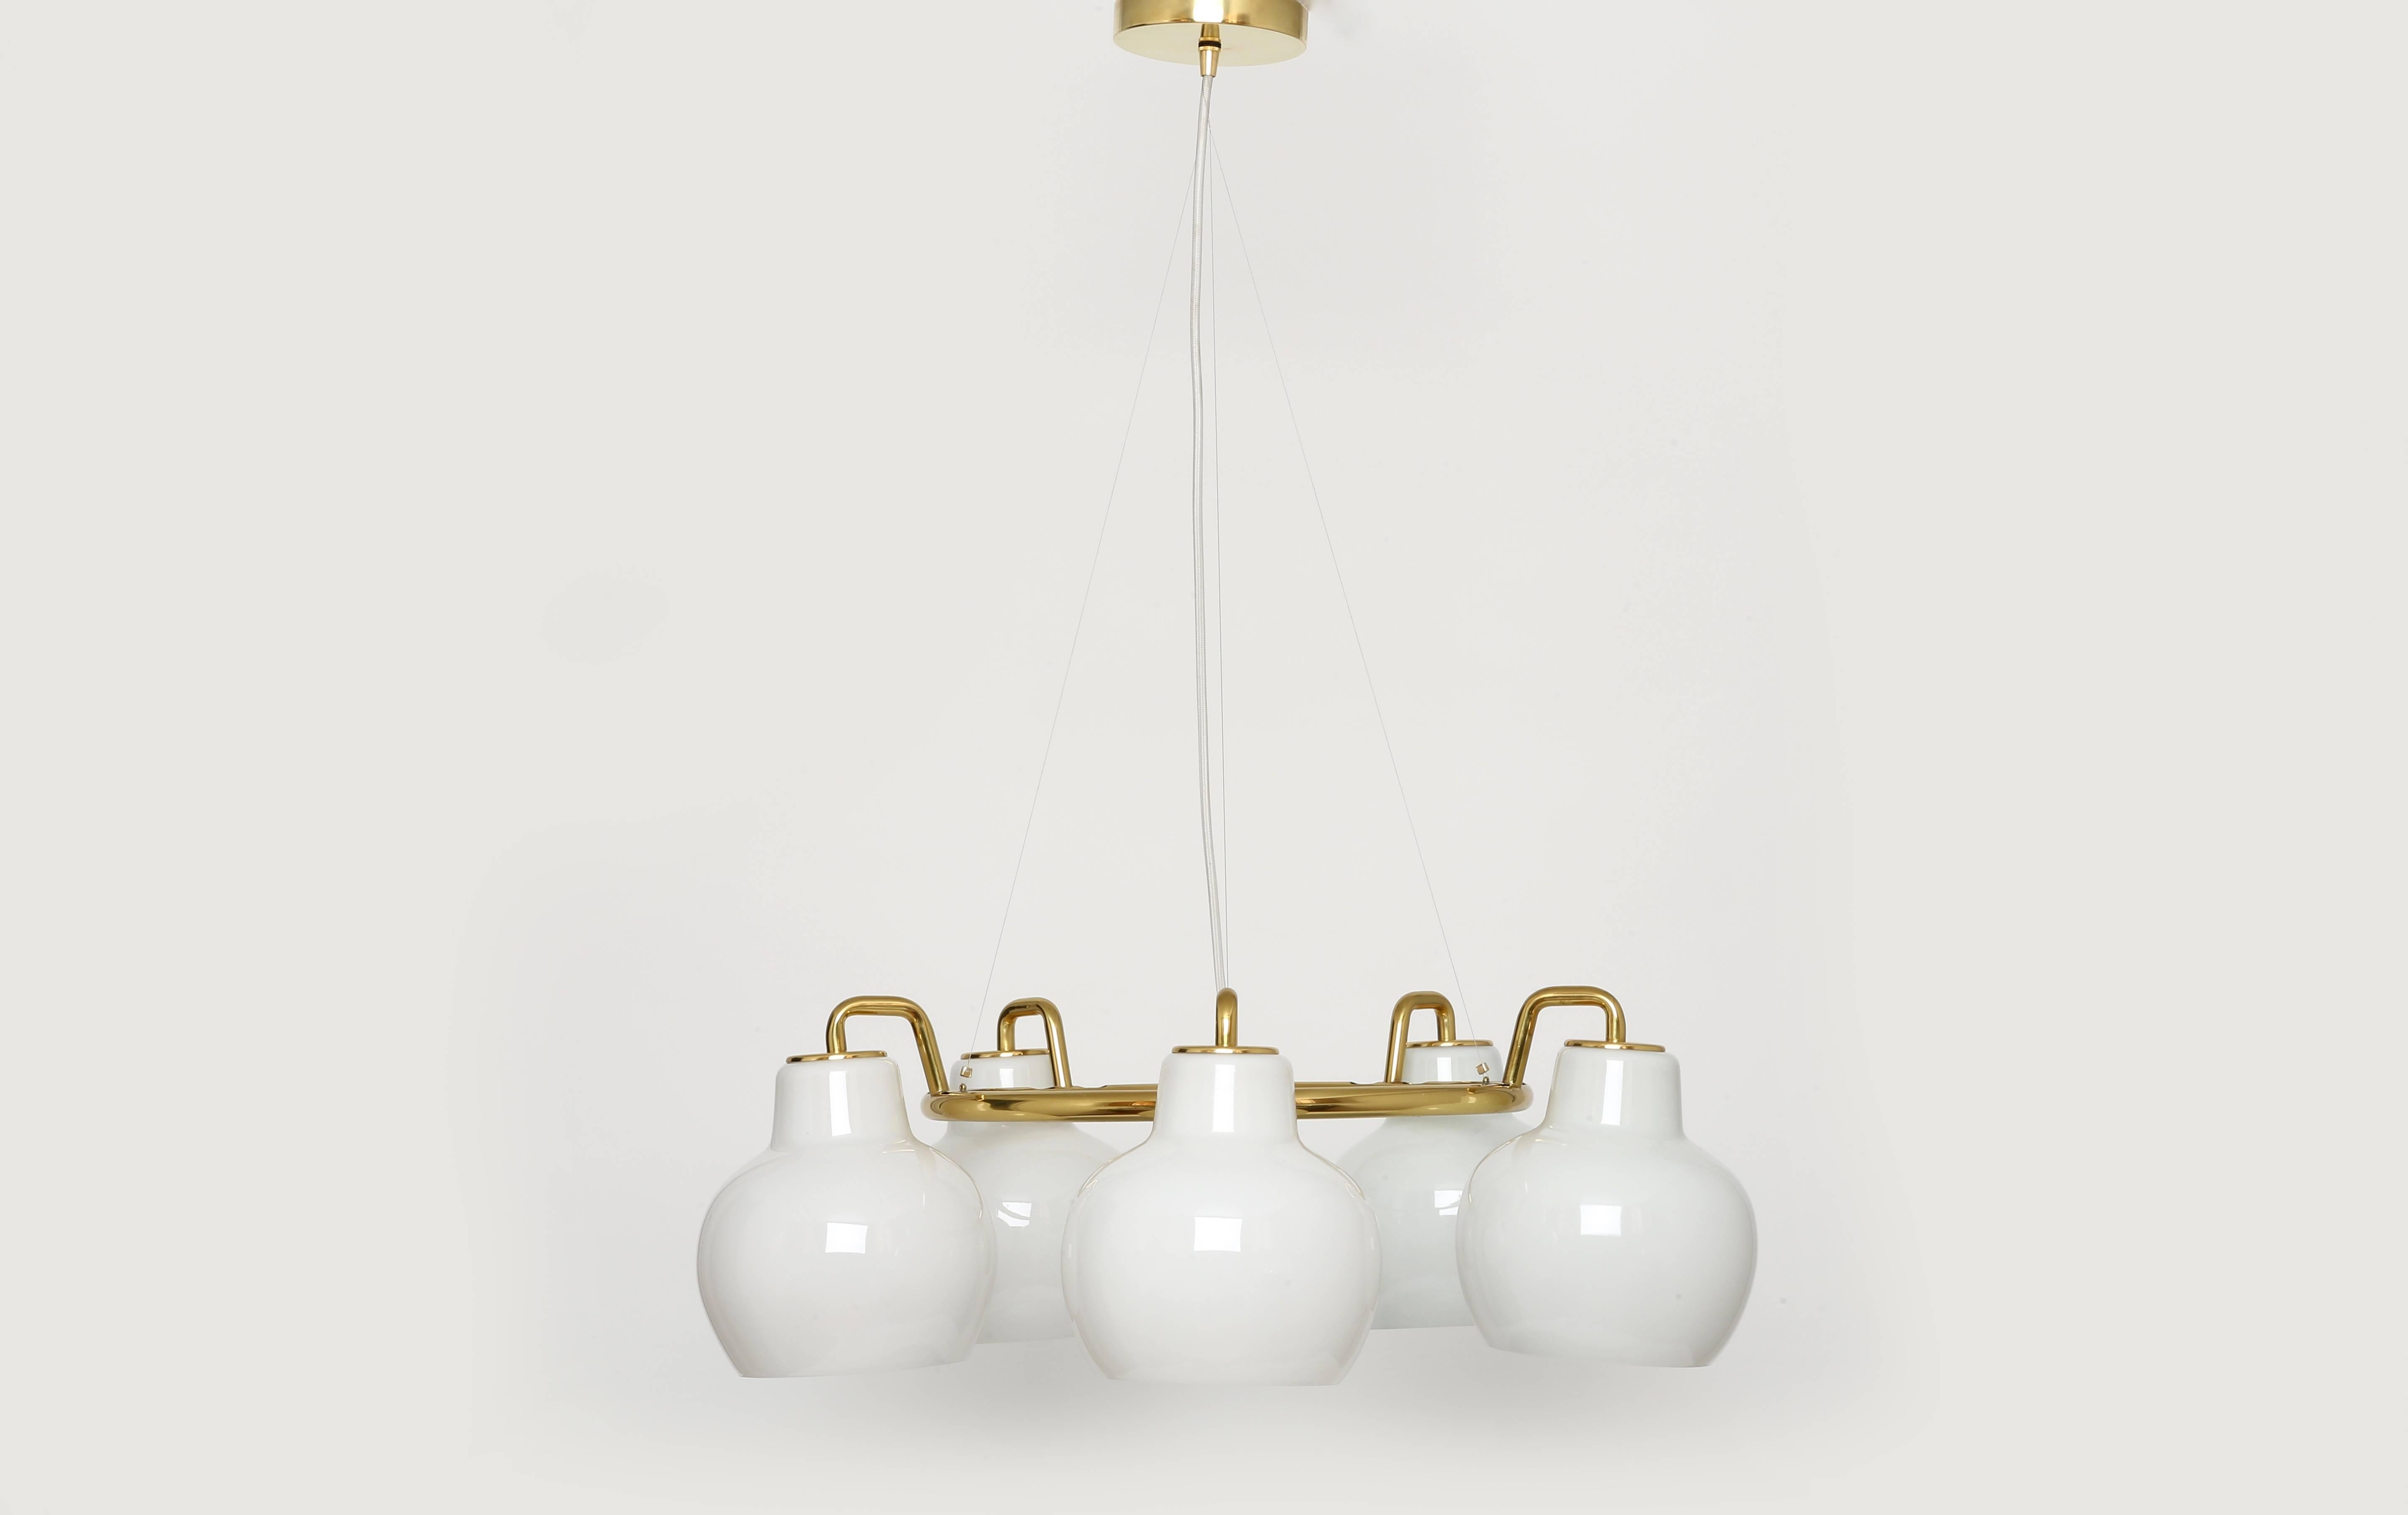 "Christiansborg" chandelier designed by Danish architect Vilhelm Lauritzen for Louis Poulsen.
Five handmade opaline glass bells and a solid brass ring,
Denmark, 1950s.
Two chandeliers available.

Matching wall lamps are available as